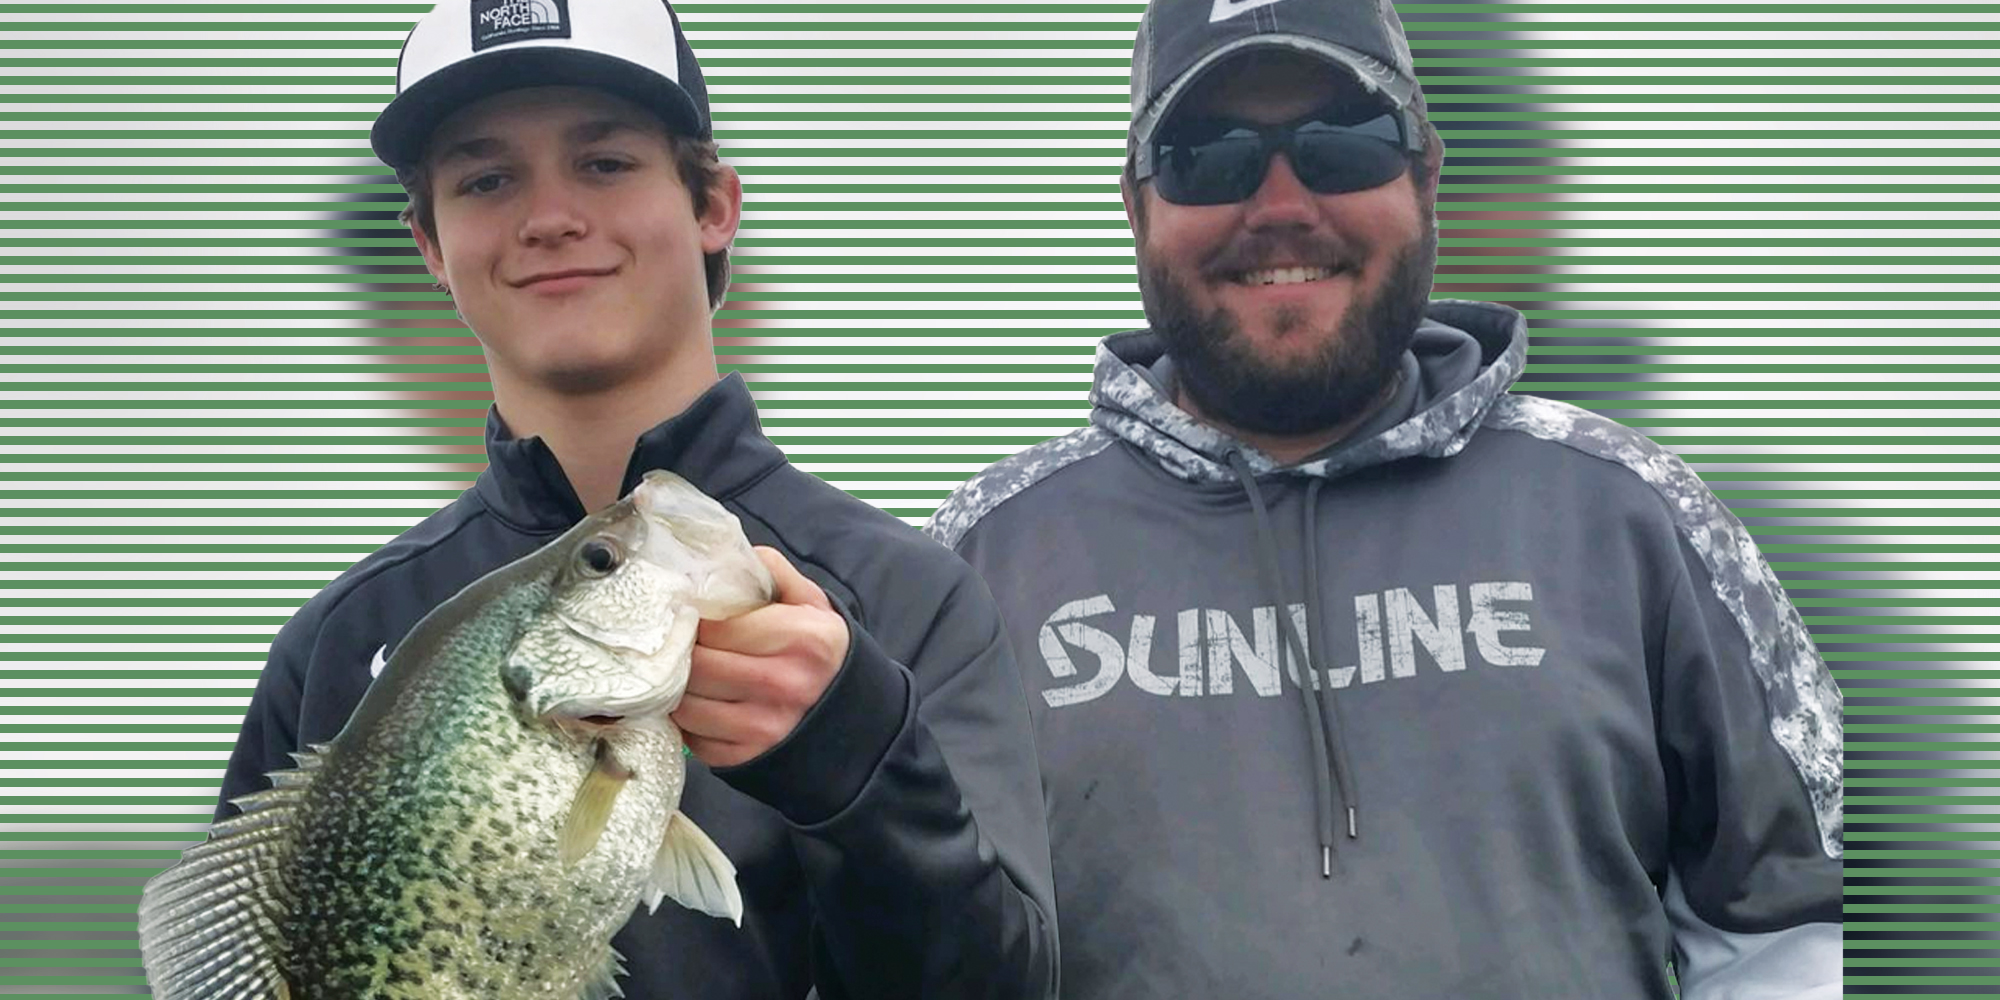 Thill  The Most Versatile Crappie Float 